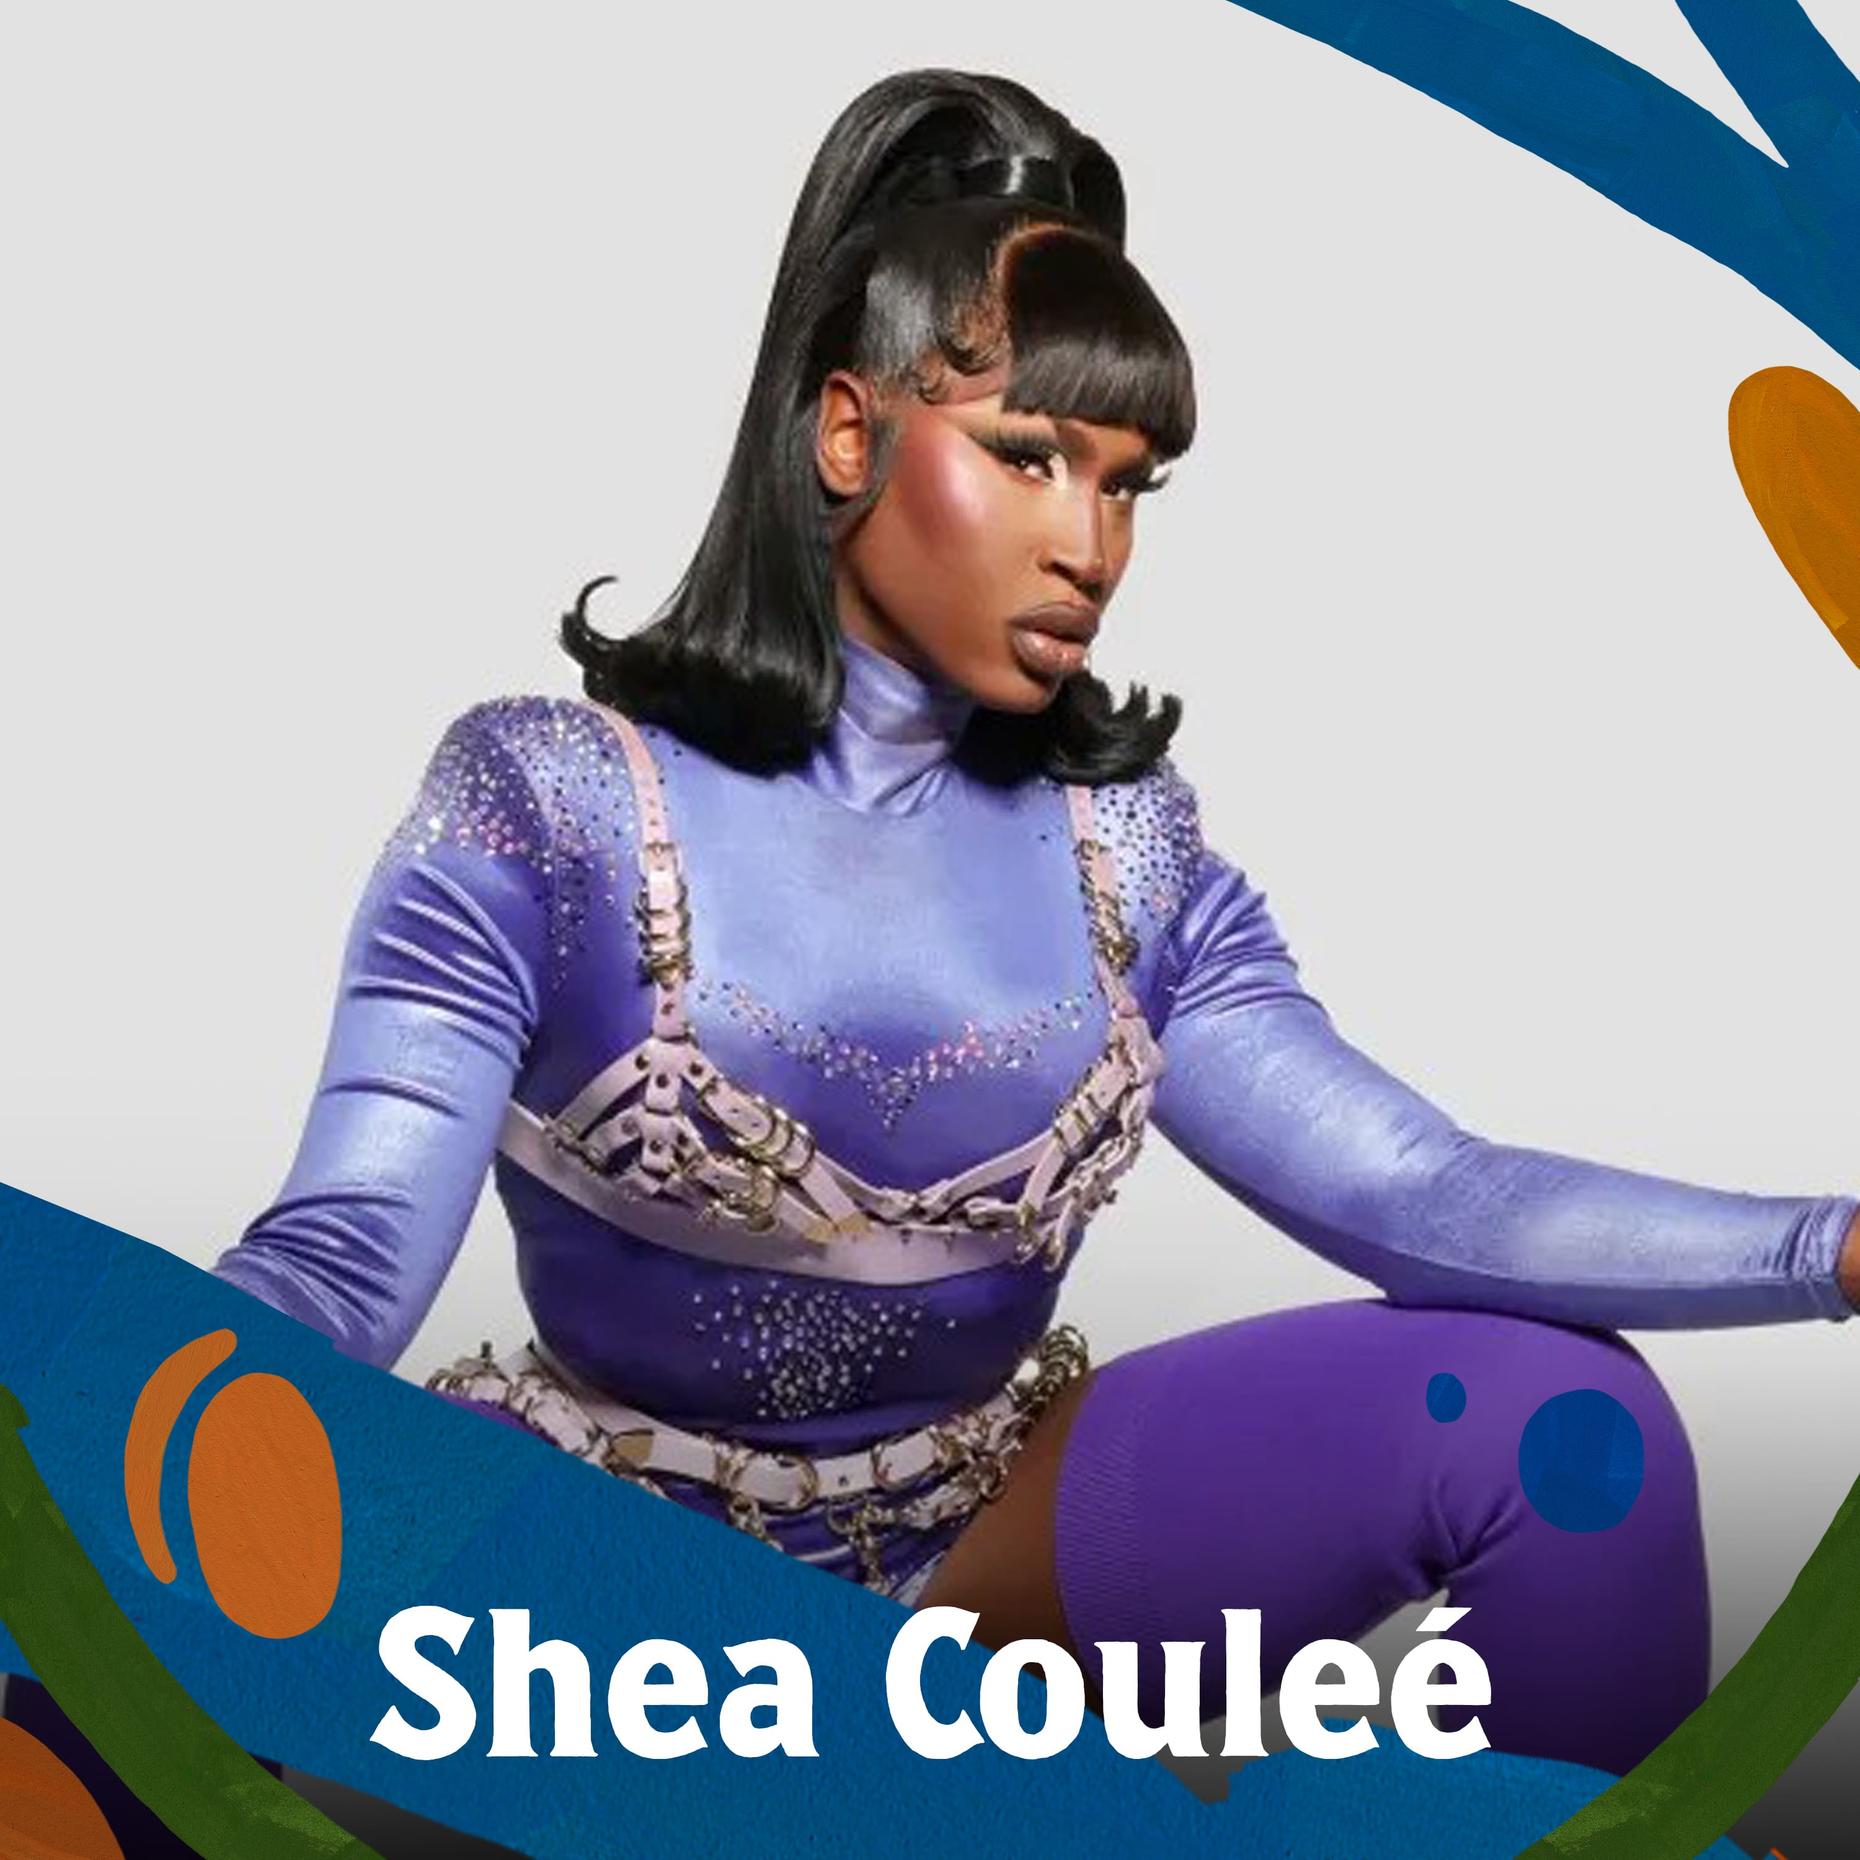 Shea Couleé: The Love Ball, their dance record, and life after